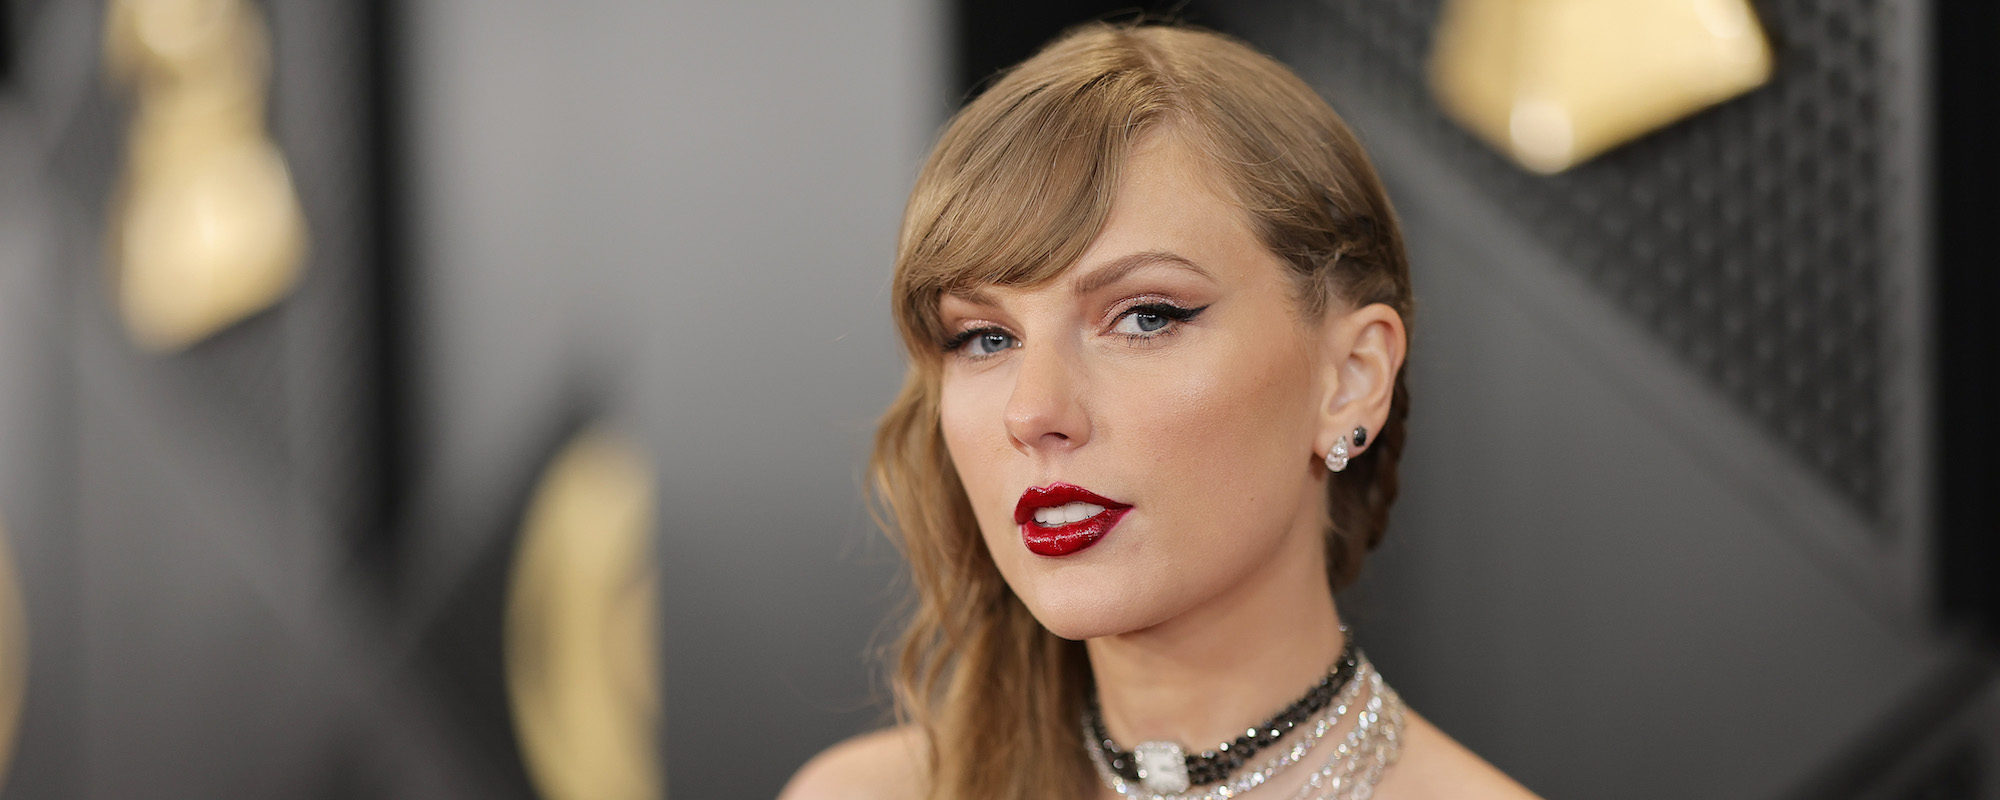 Taylor Swift Makes History, Tops Paul Simon, Stevie Wonder, and Frank Sinatra as First Artist to Win a GRAMMY for Album of the Year Four Times